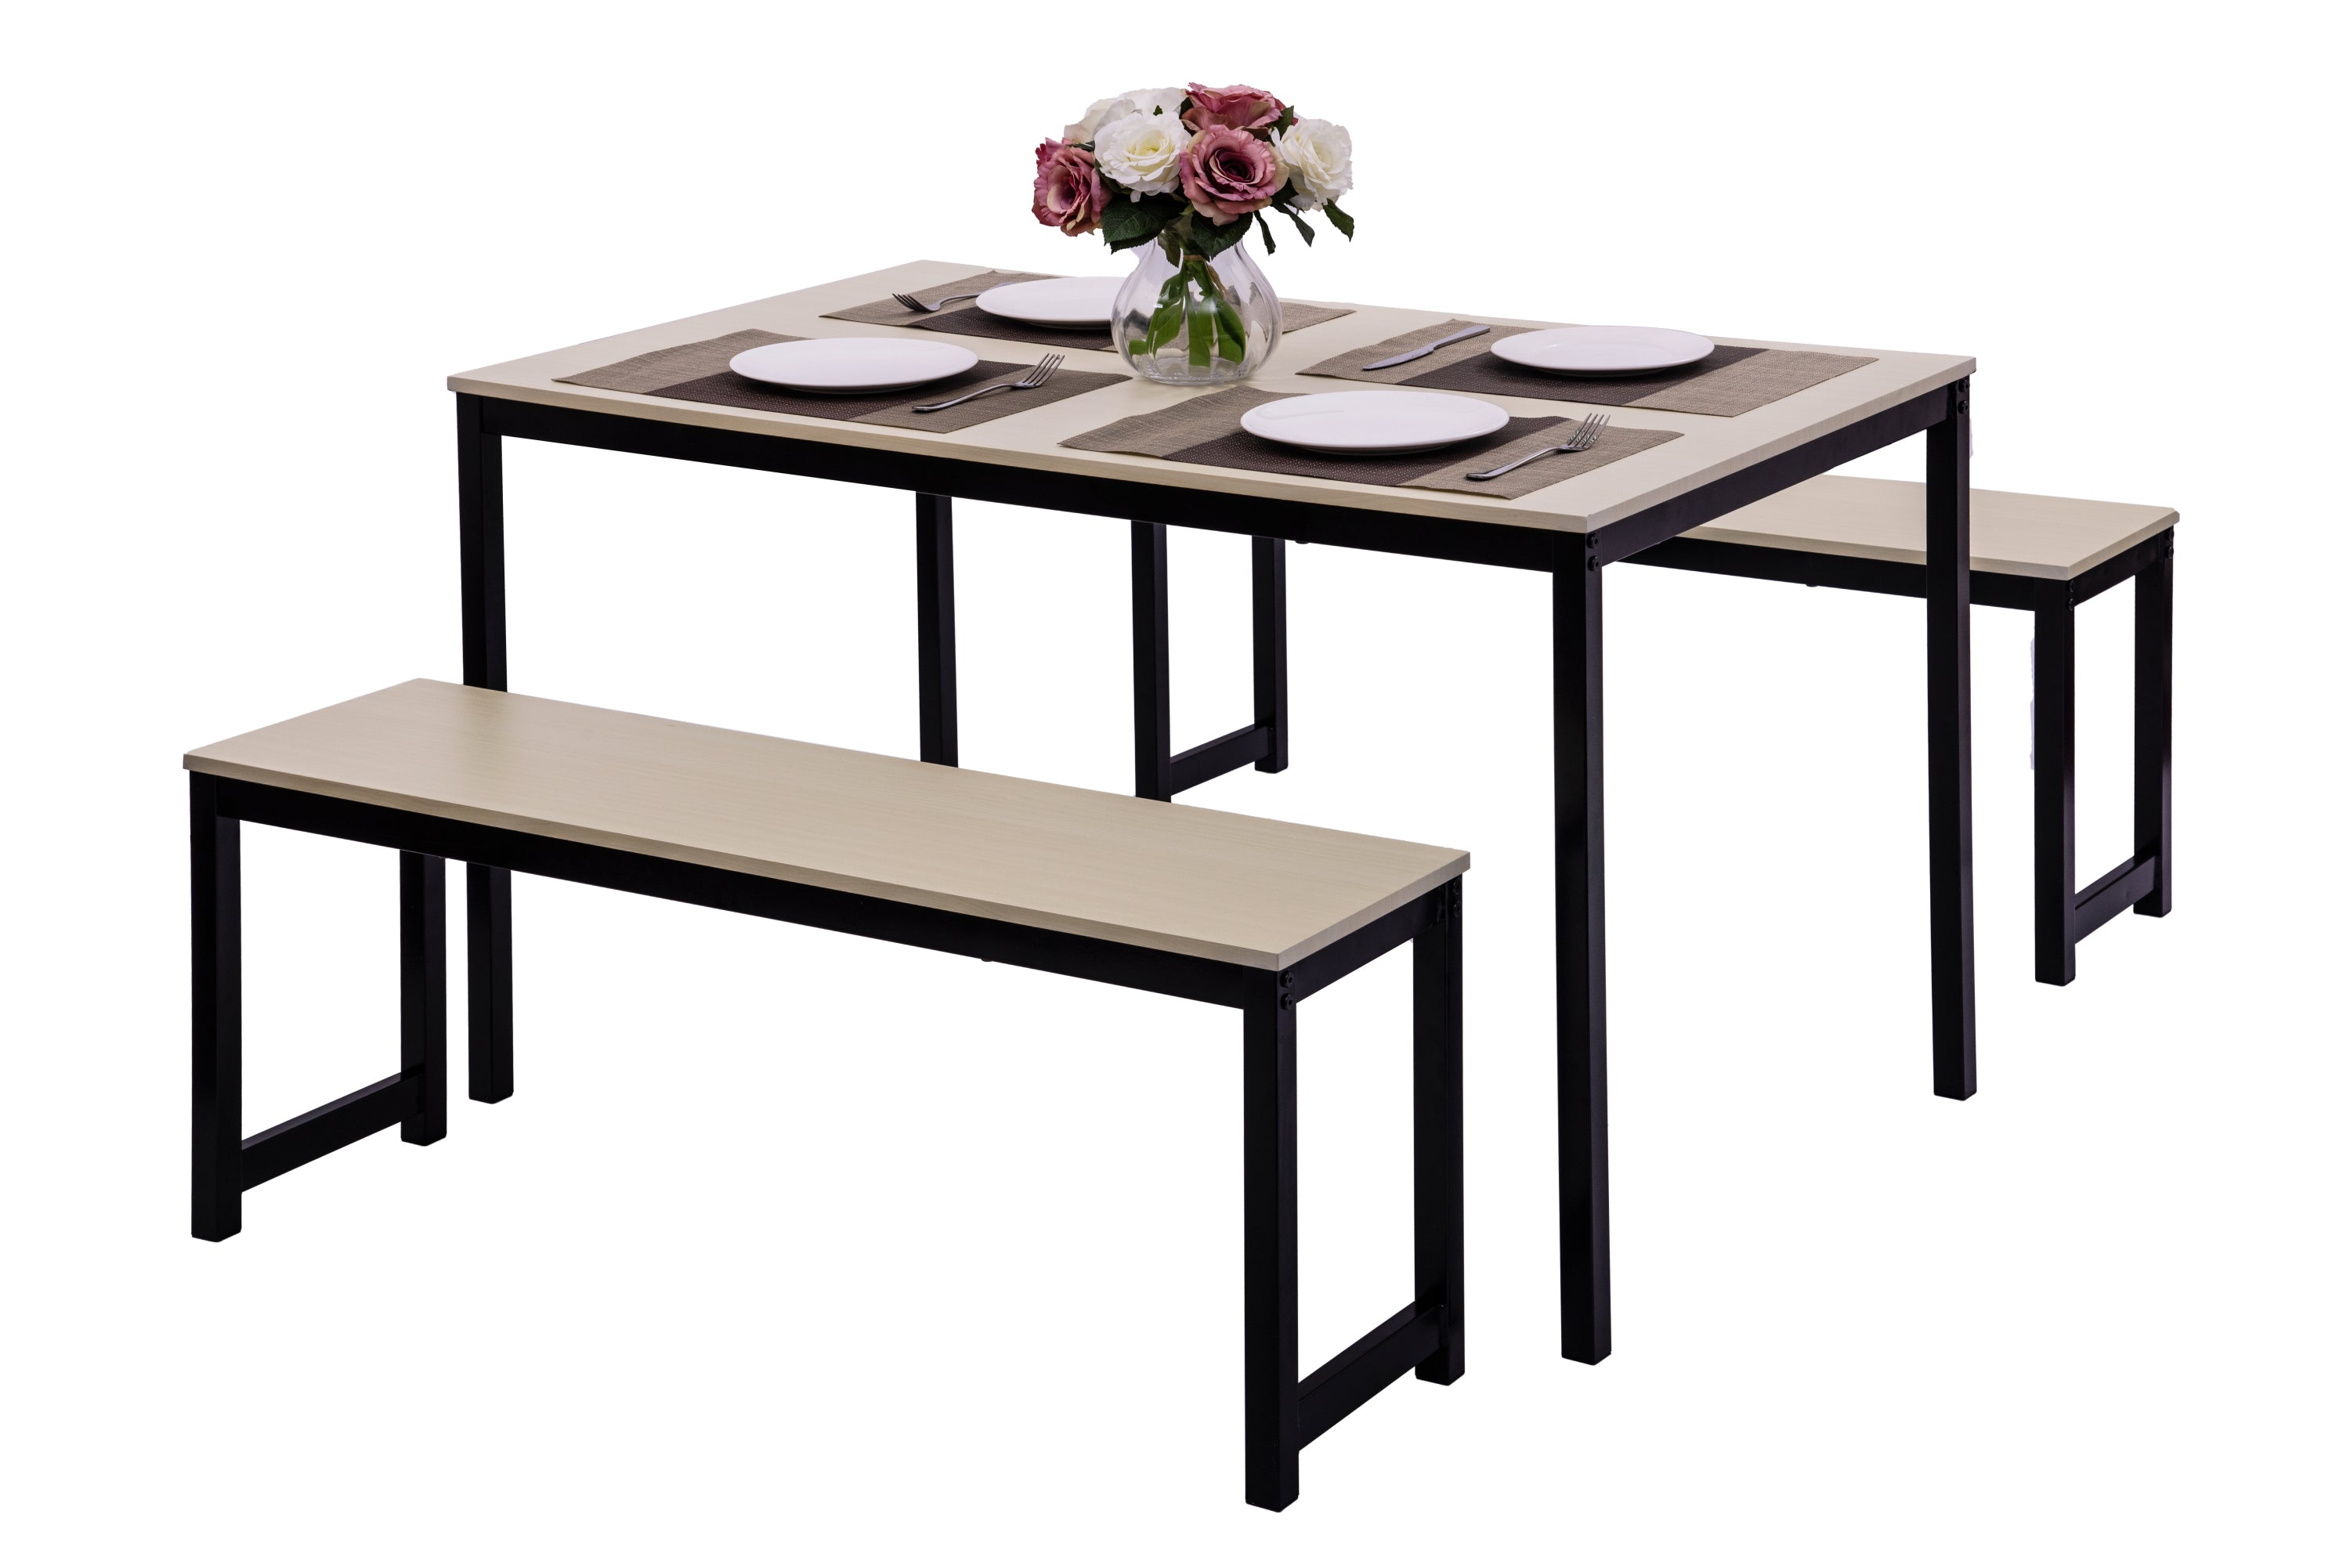 U_STYLE 3 Piece Dining set with Two benches, Modern Dining Room Furniture